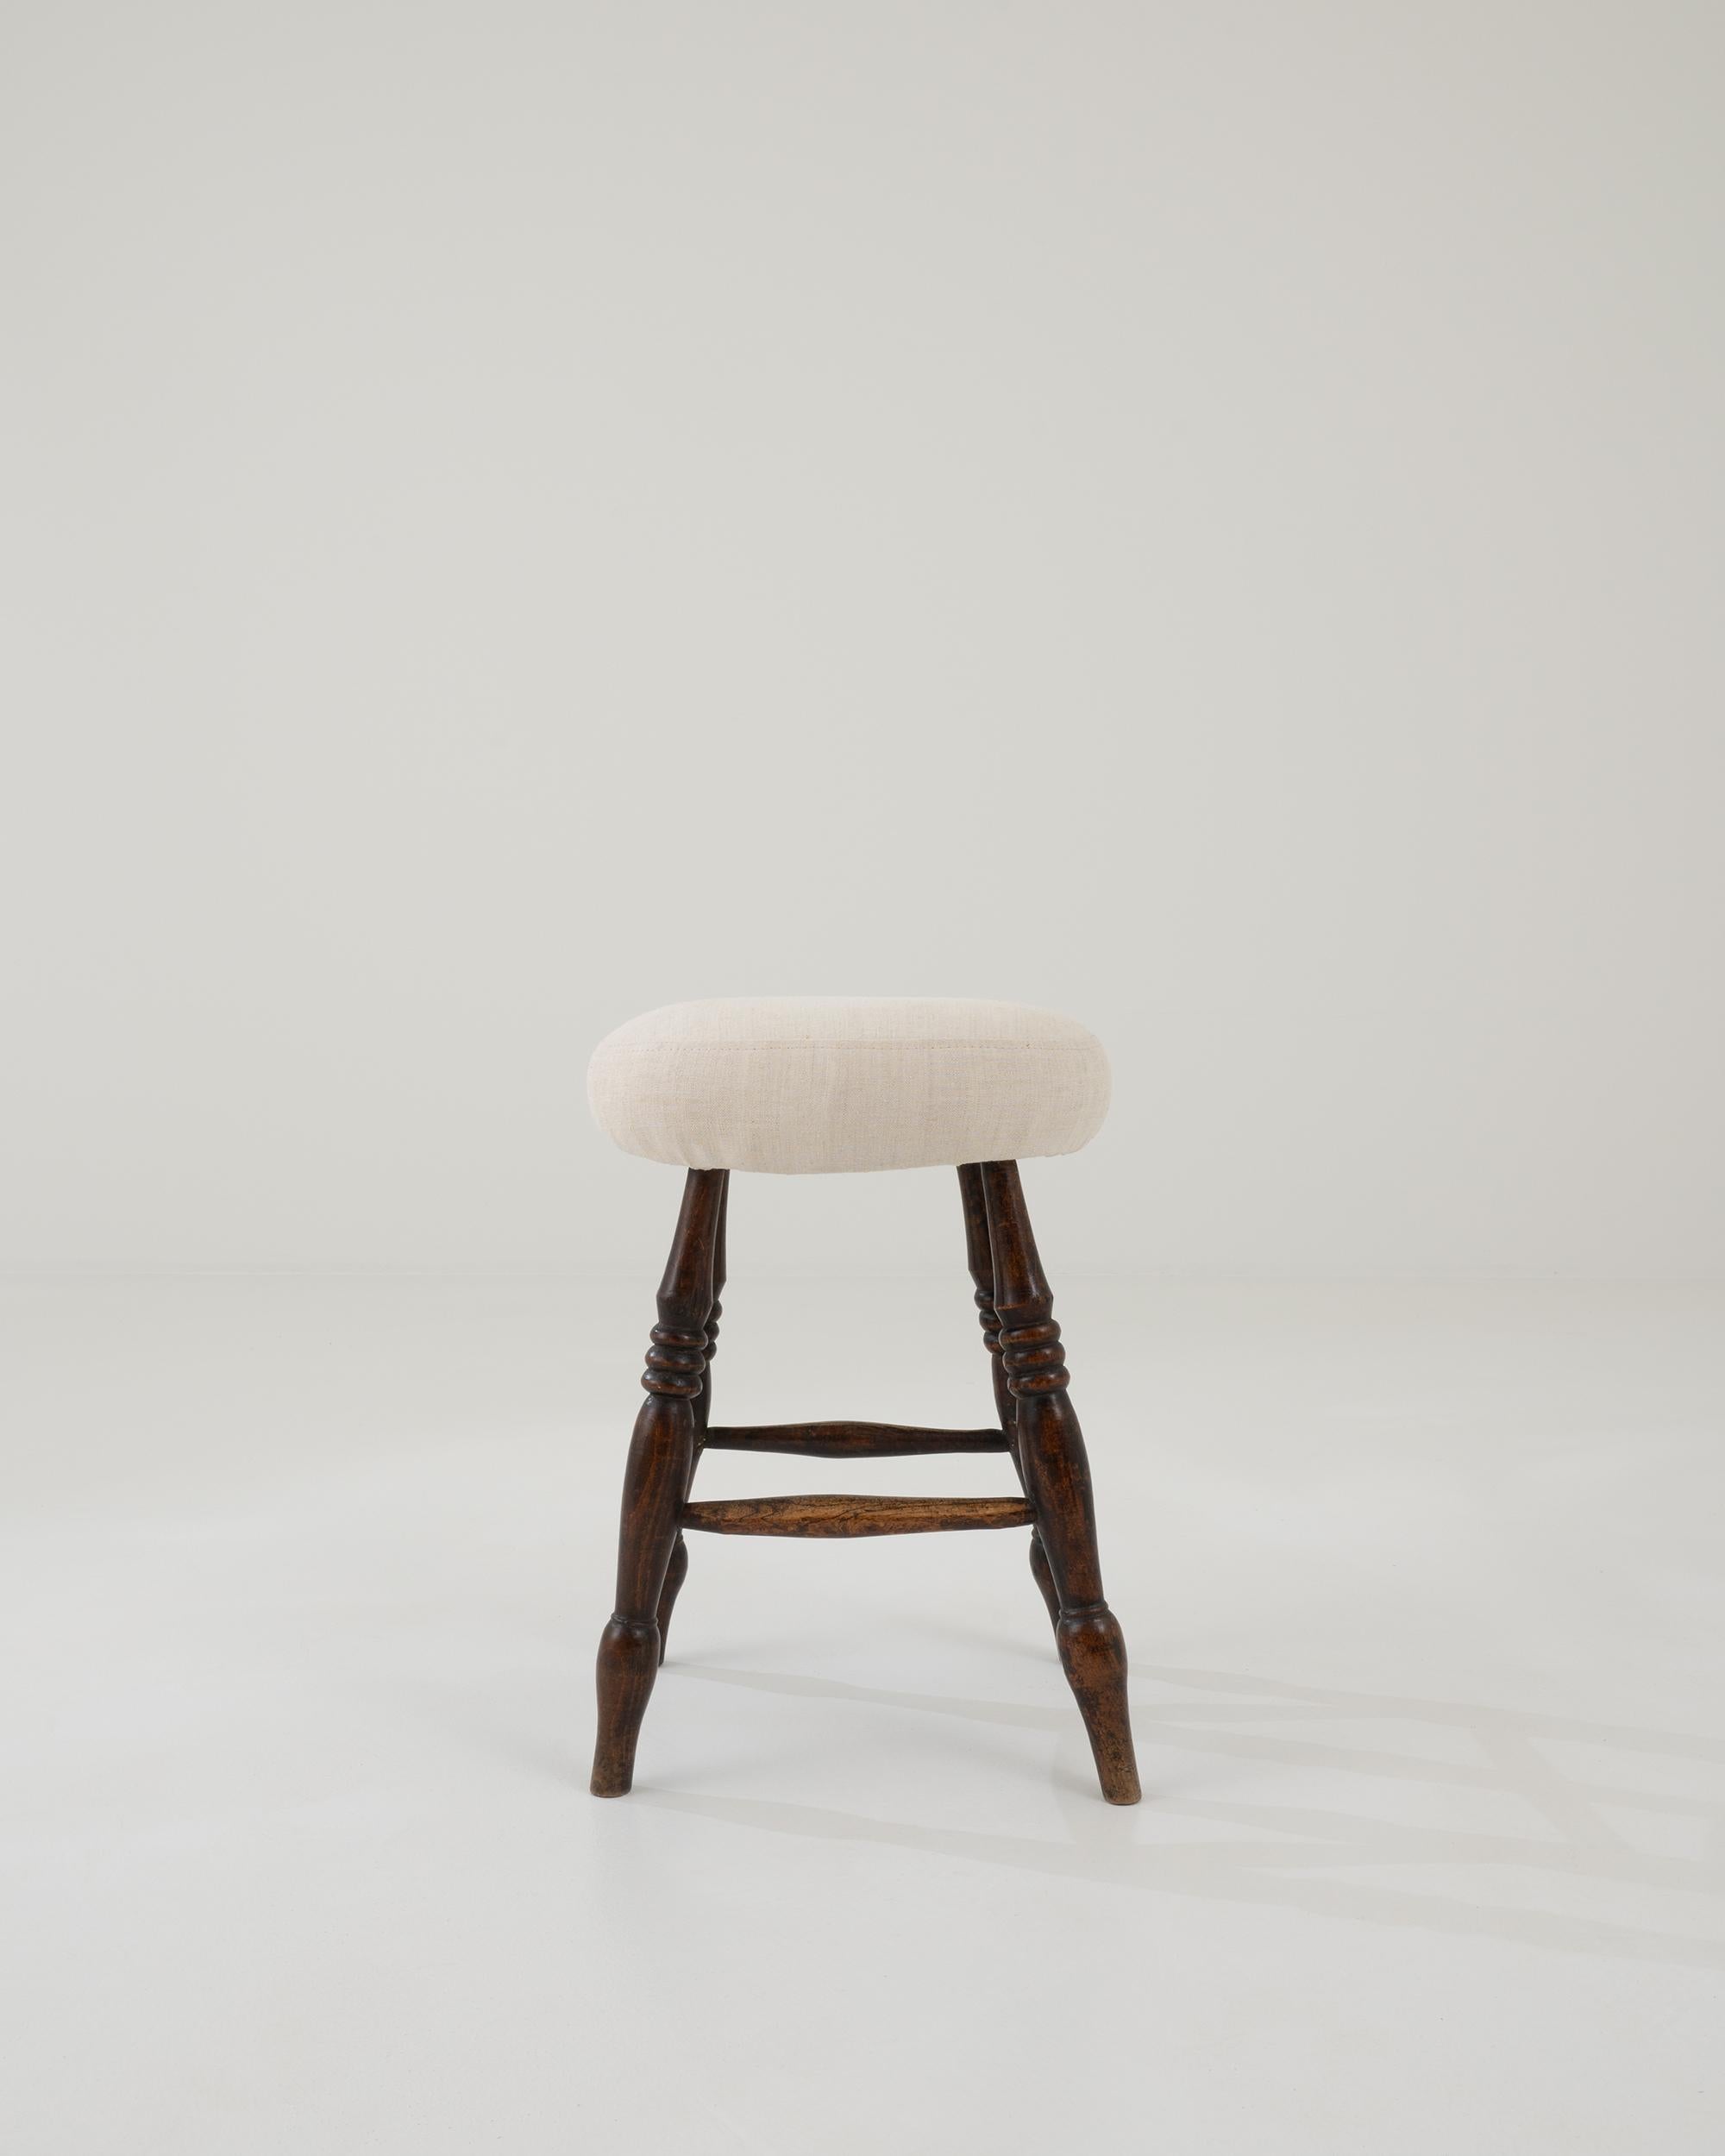 A wooden stool with an upholstered seat created in 20th century France. Rustic and full of warmth, this small and modest stool quietly imparts its age and experience. A gentle patina has formed along the lathed stretchers, indicating a place where